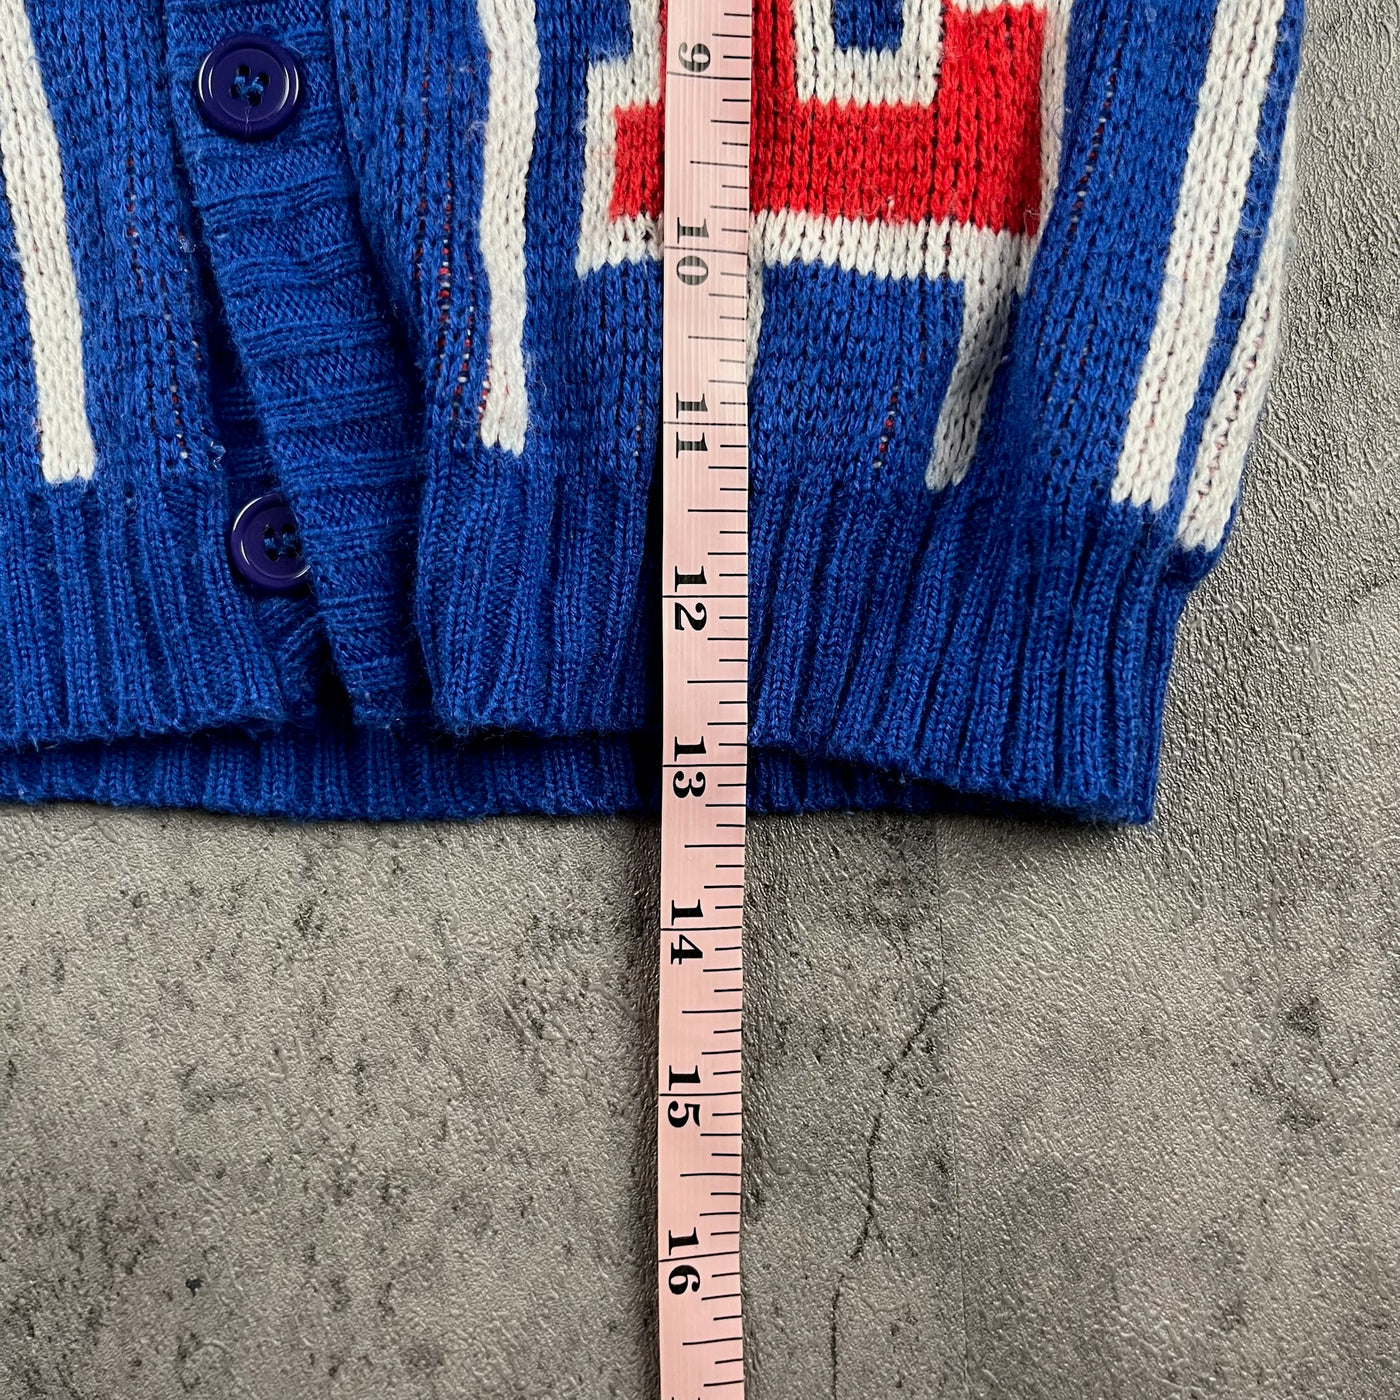 Vintage Lacoste Crewknit 18-24 Months